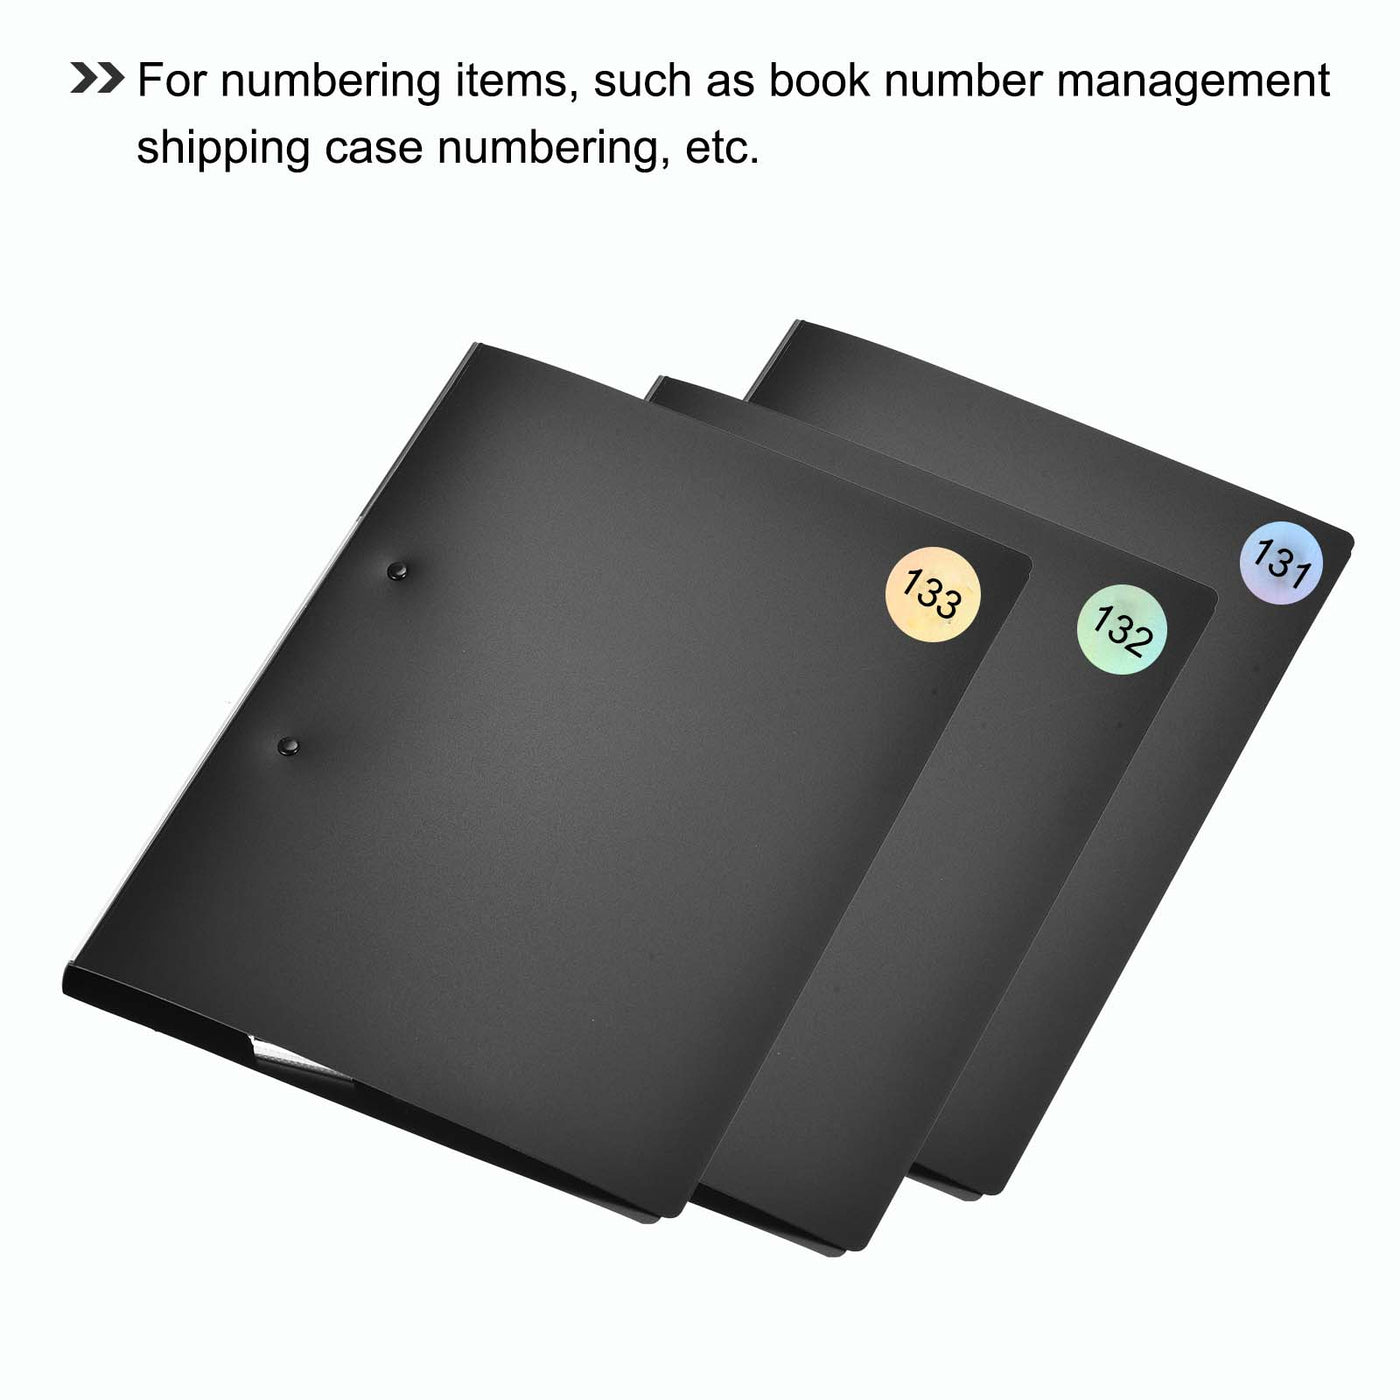 Harfington Laser Number Stickers, Number 101 to 200 Round Self Adhesive Reflective Sticker for Inventory, Storage Organizing, 10 Sheets(1000pcs)